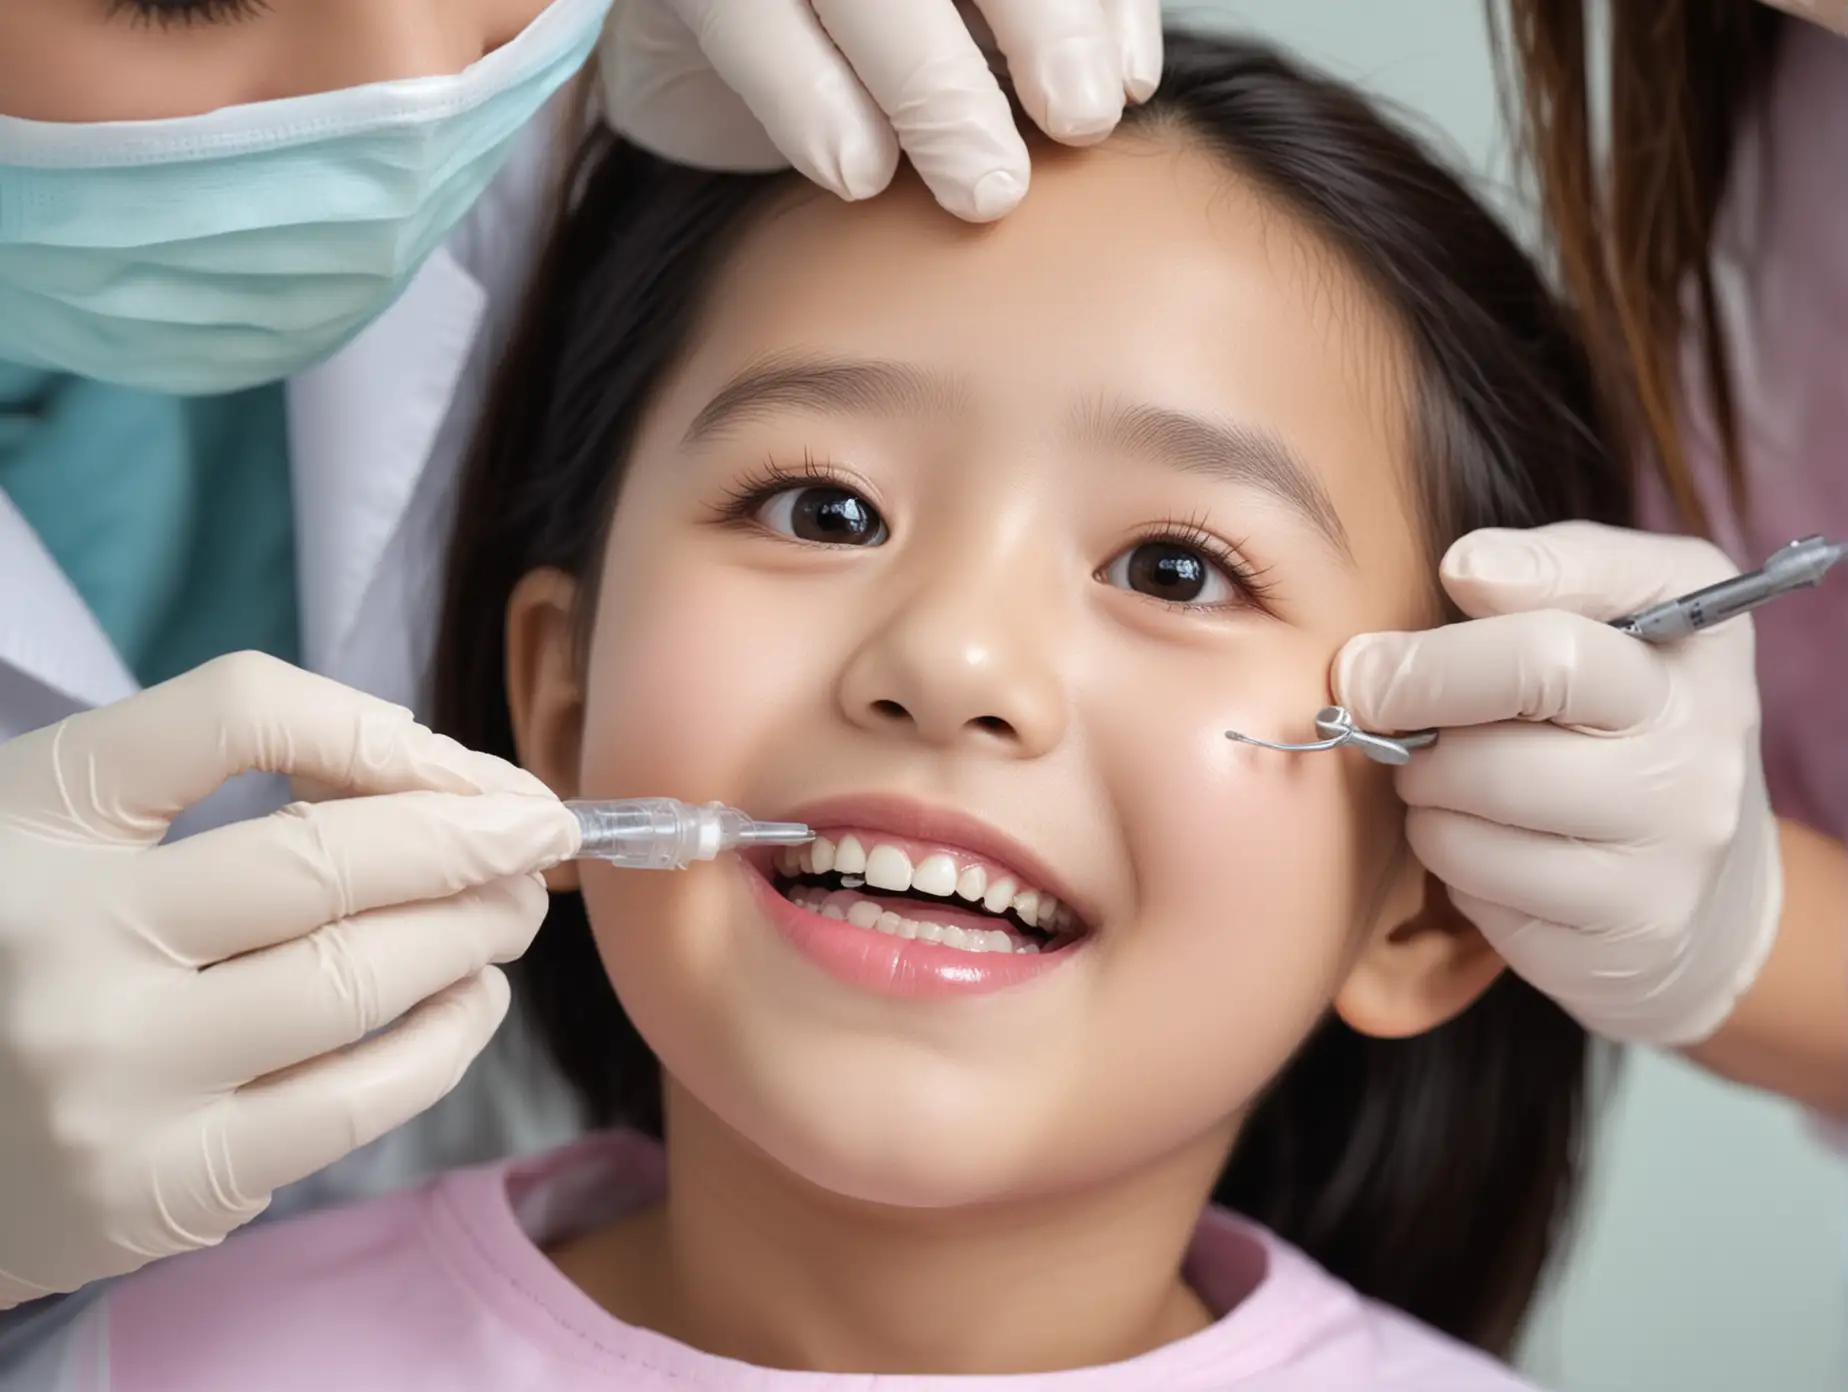 Chinese-Dentist-Examining-Young-Girls-Oral-Health-with-Precision